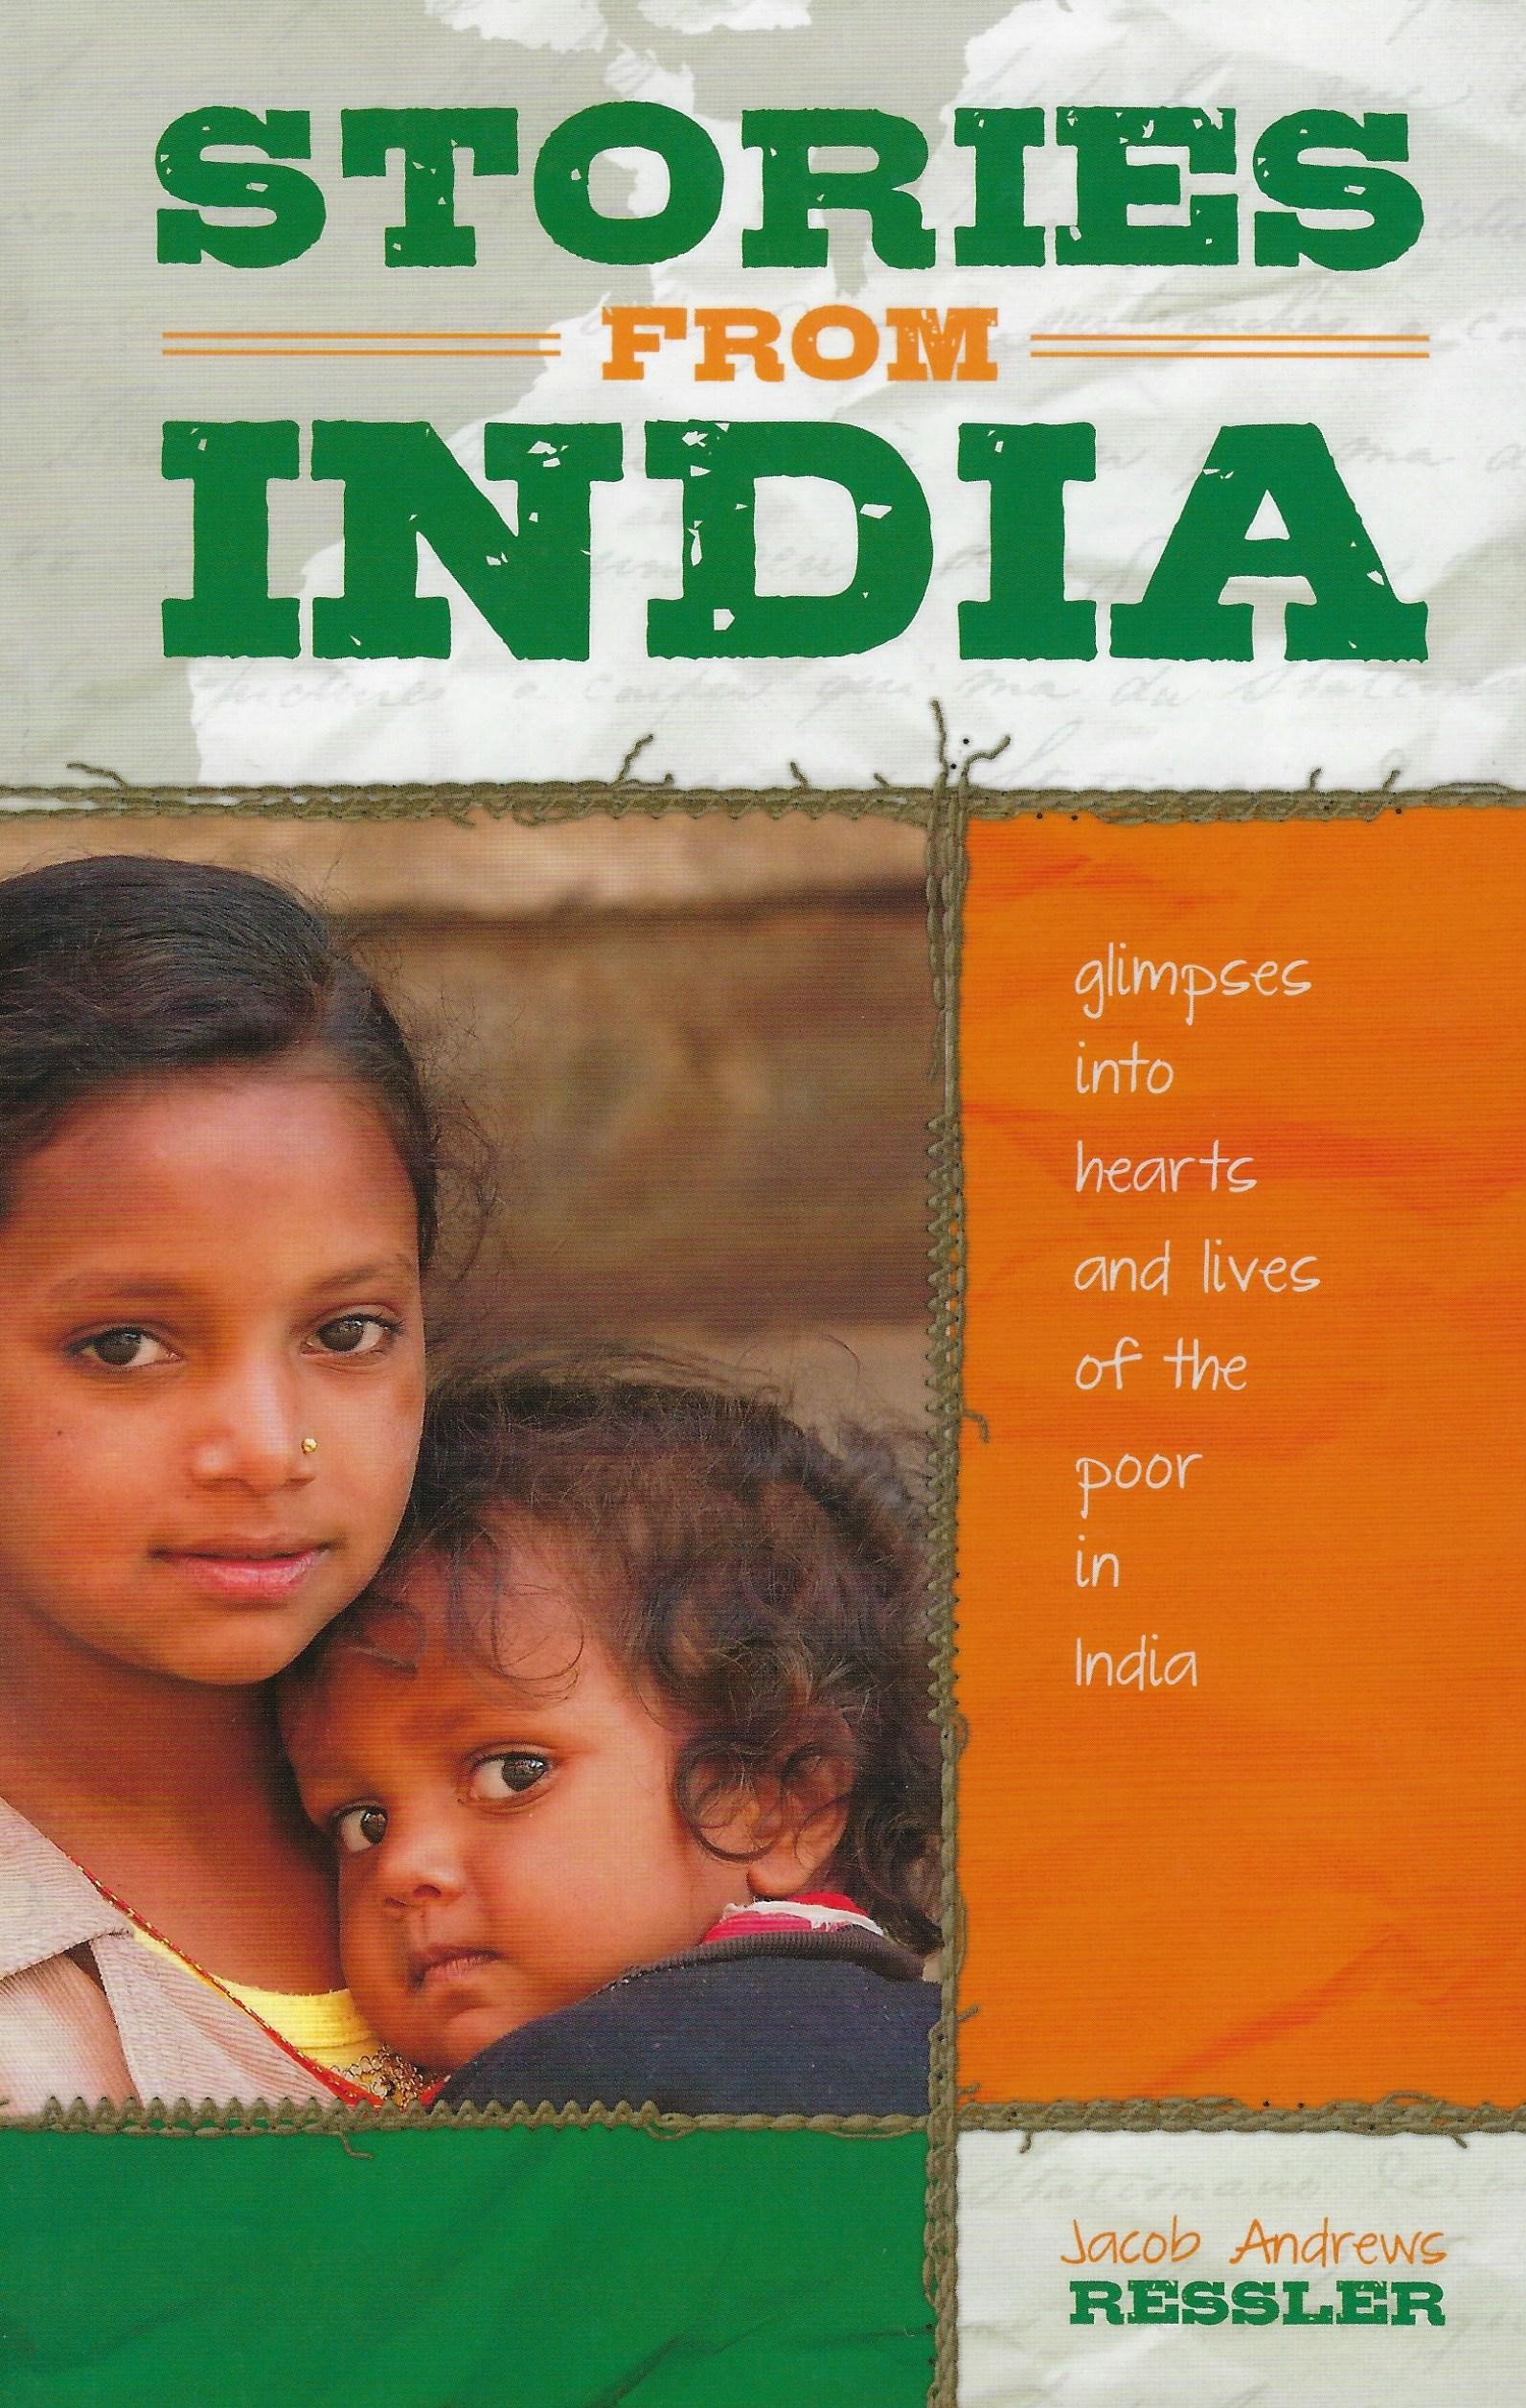 STORIES FROM INDIA Jacob Andrews Ressler